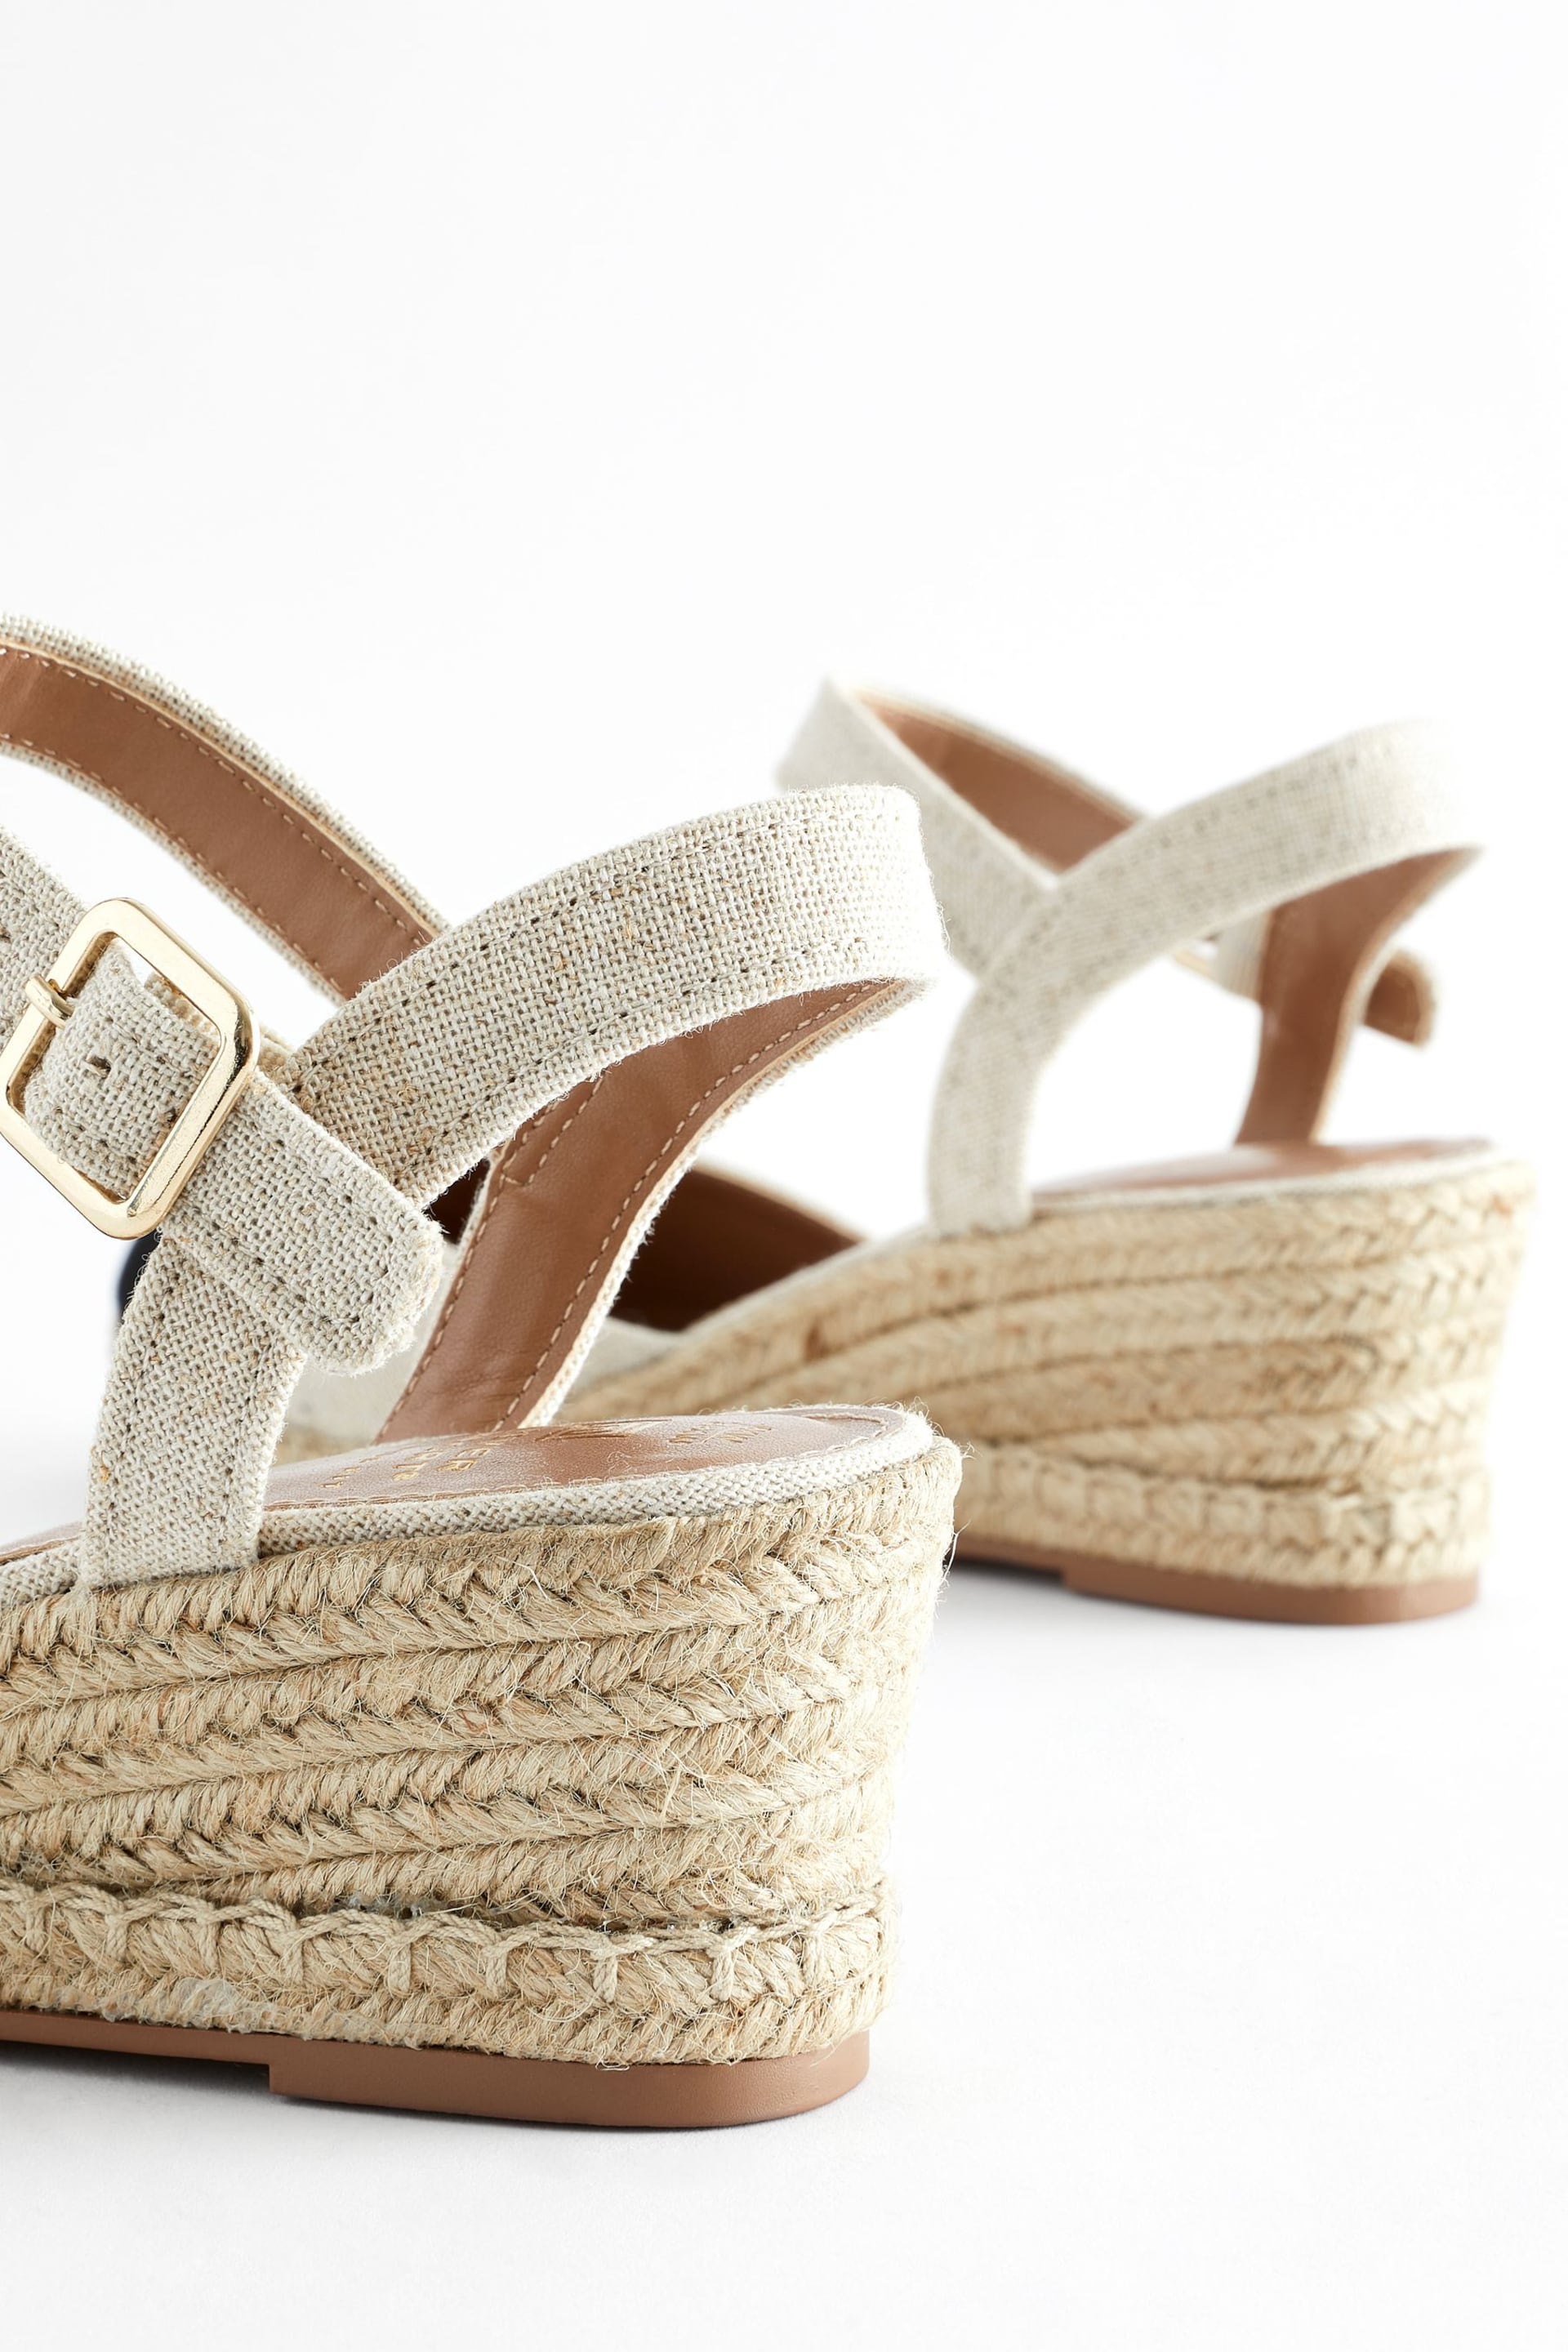 Neutral Extra Wide Fit Forever Comfort® Toe Cap Closed Toe Wedges - Image 3 of 3